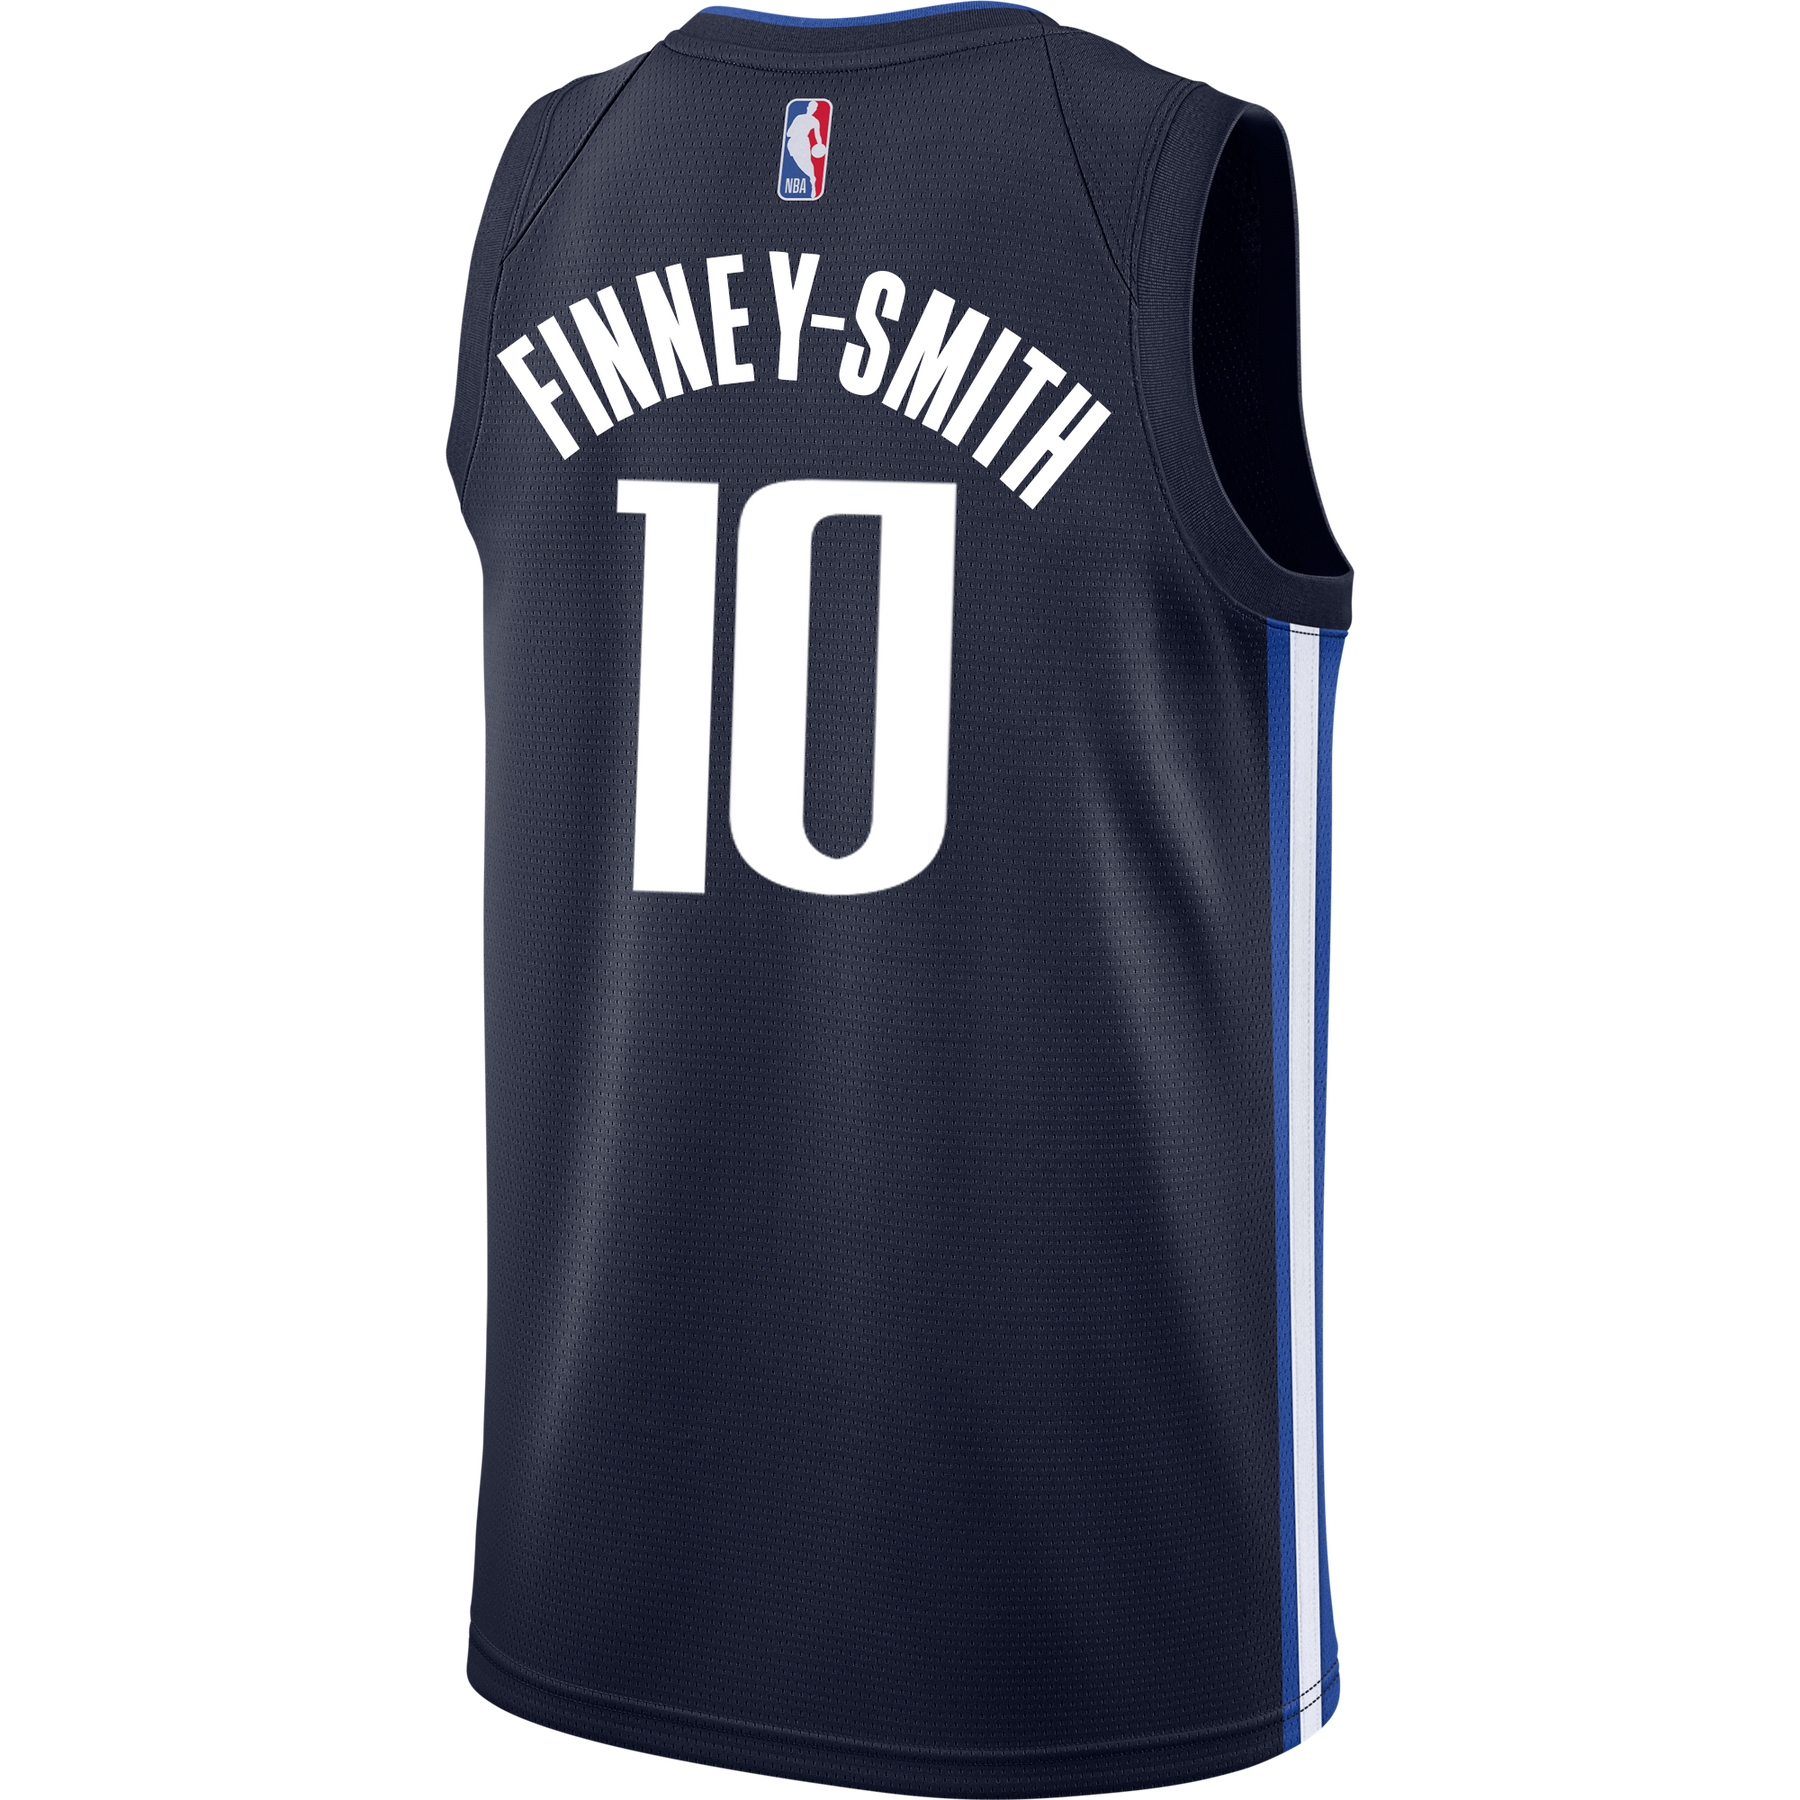 jersey smith